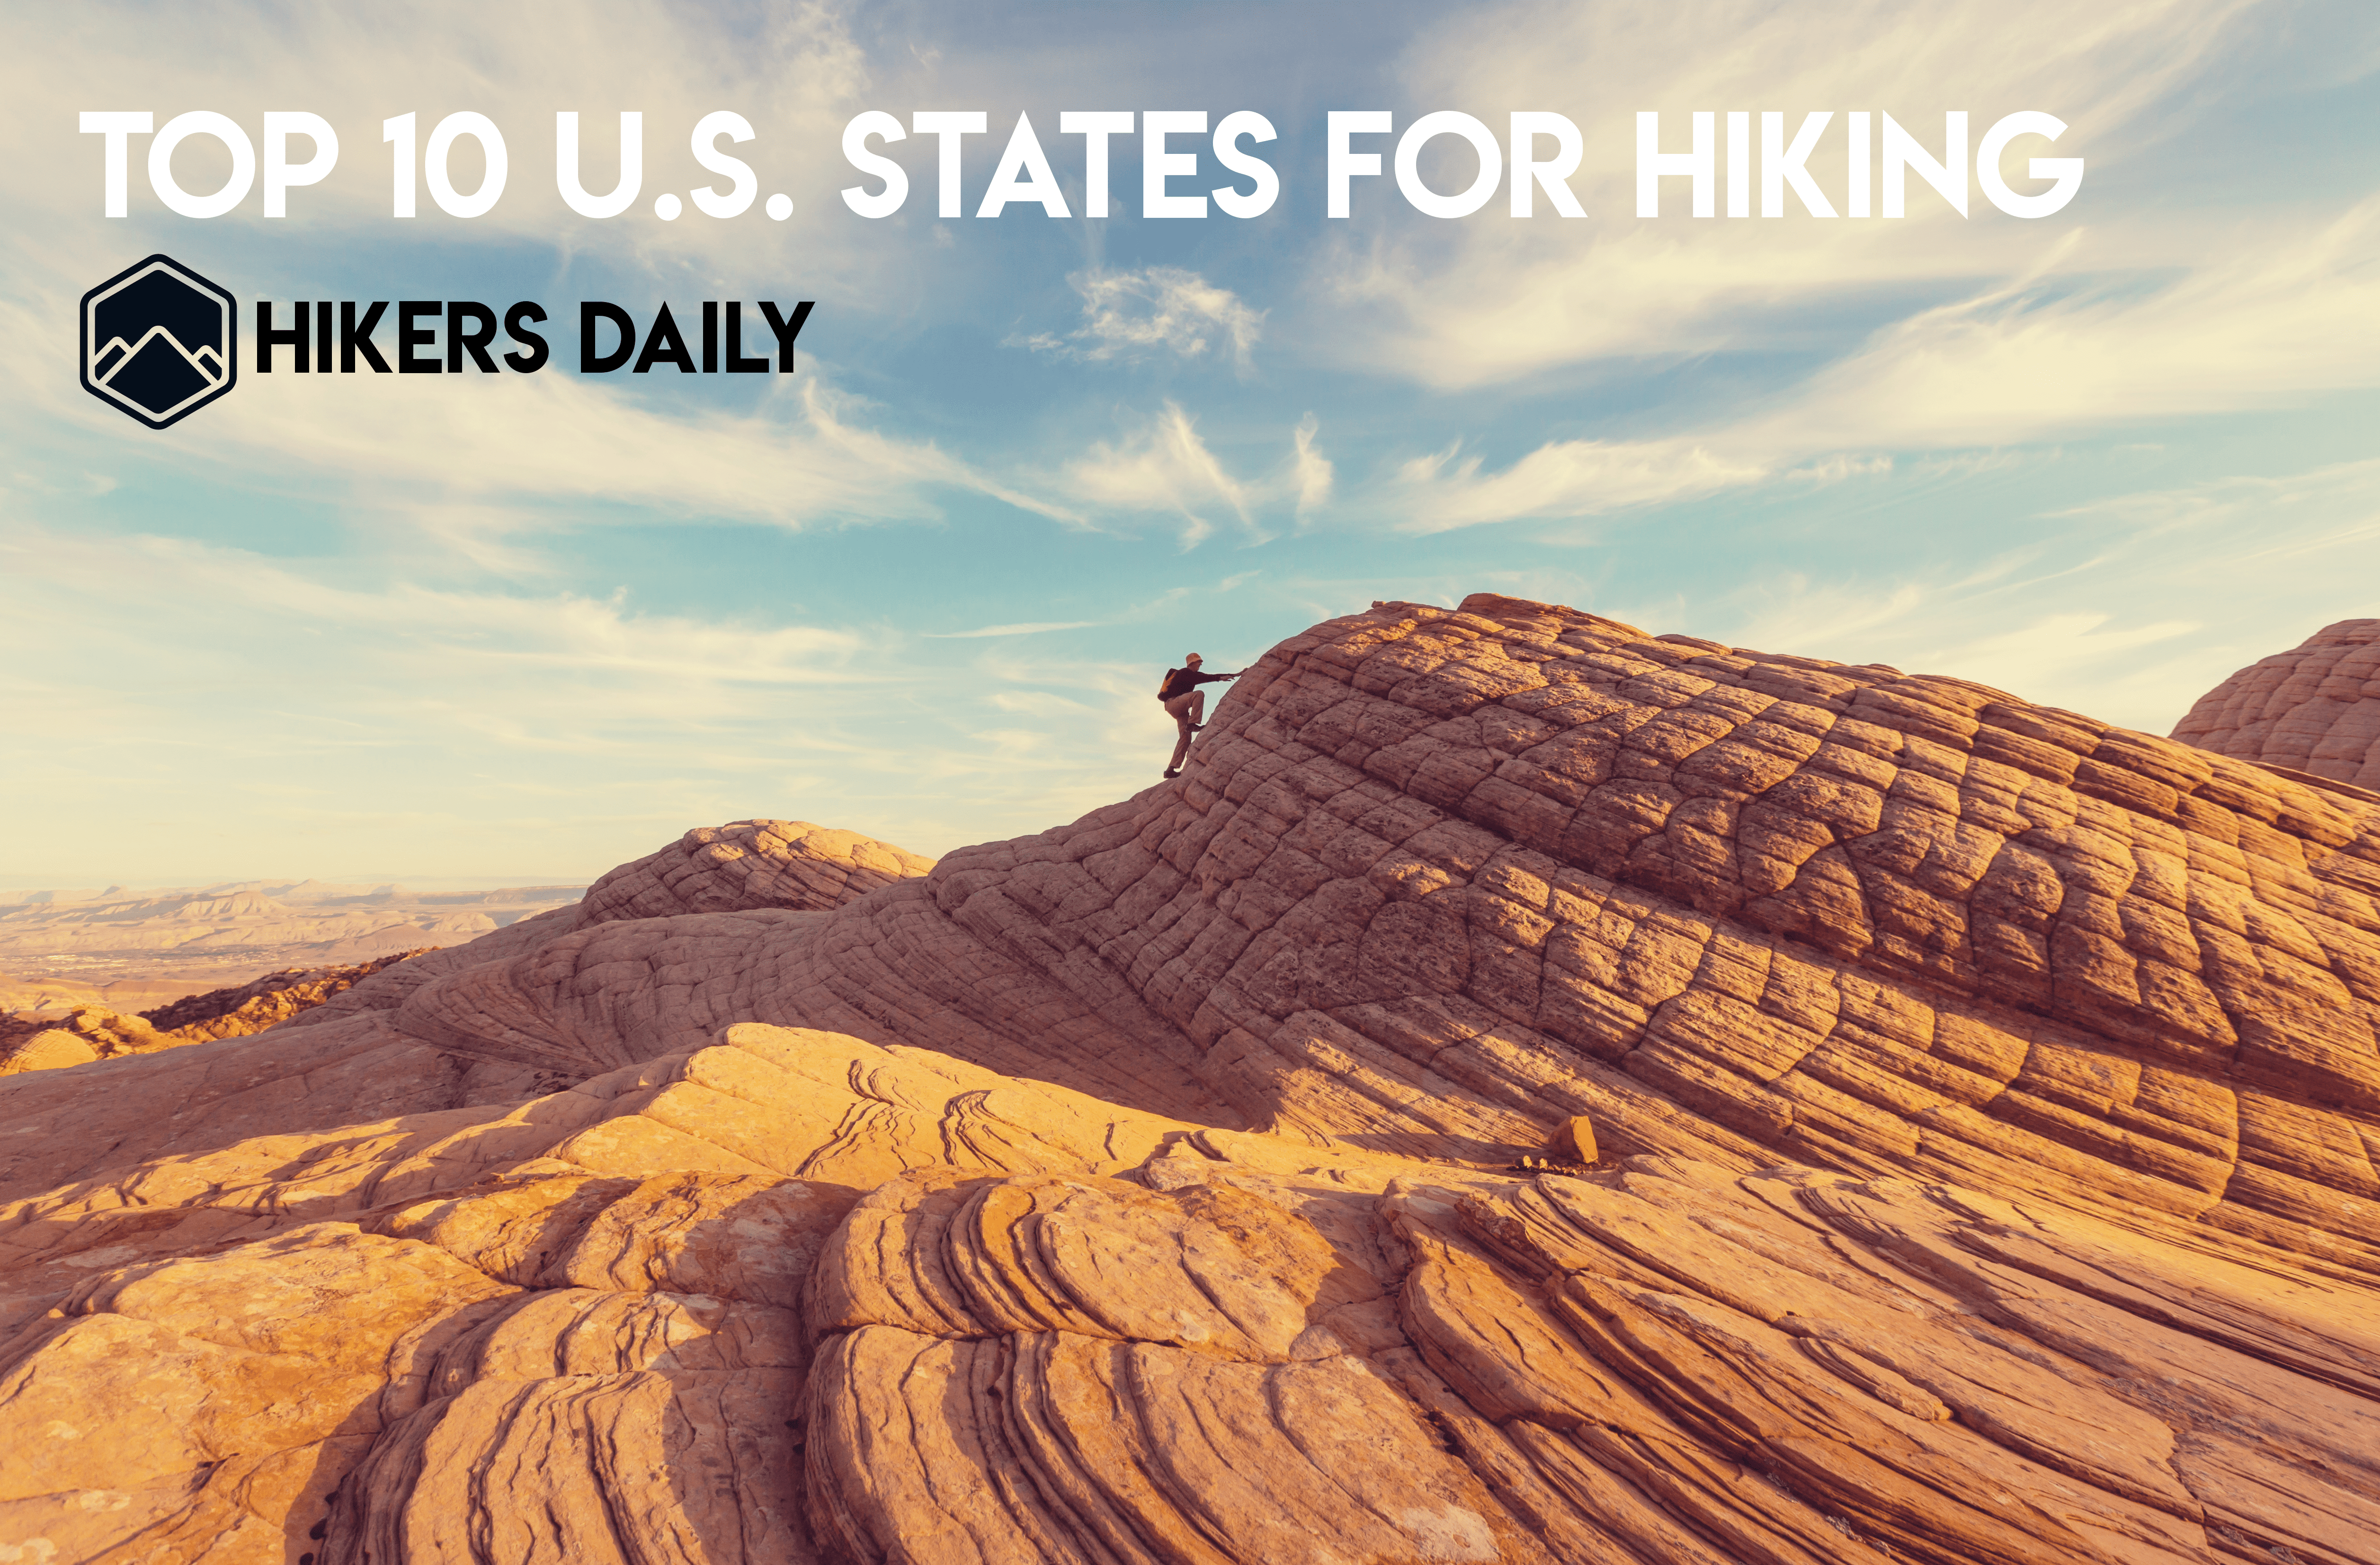 Top 10 US States For Hiking